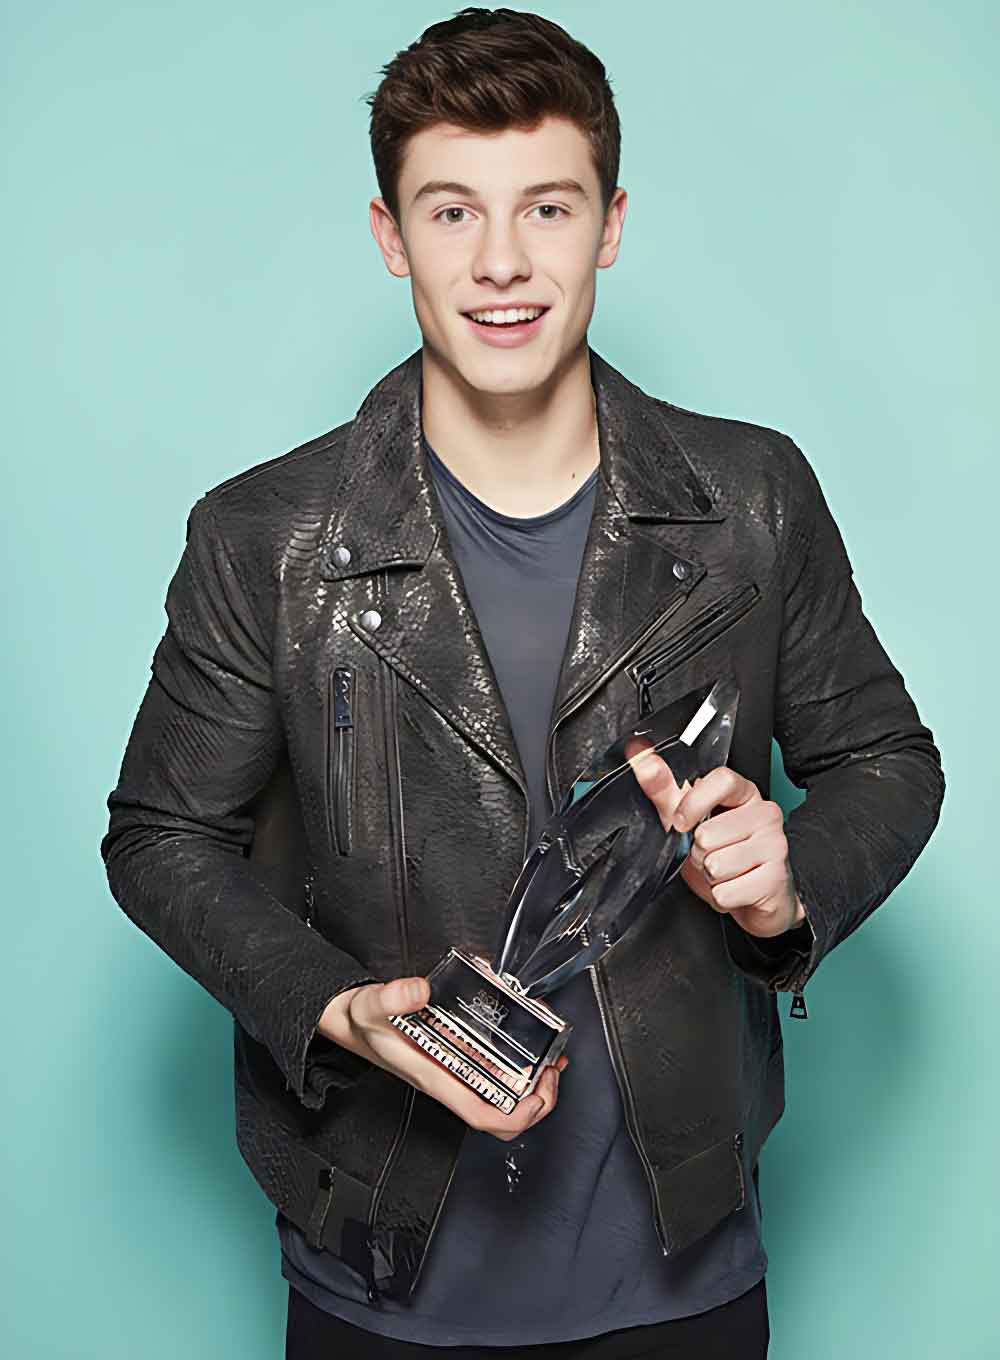 Iconic leather jacket reminiscent of Shawn Mendes' style